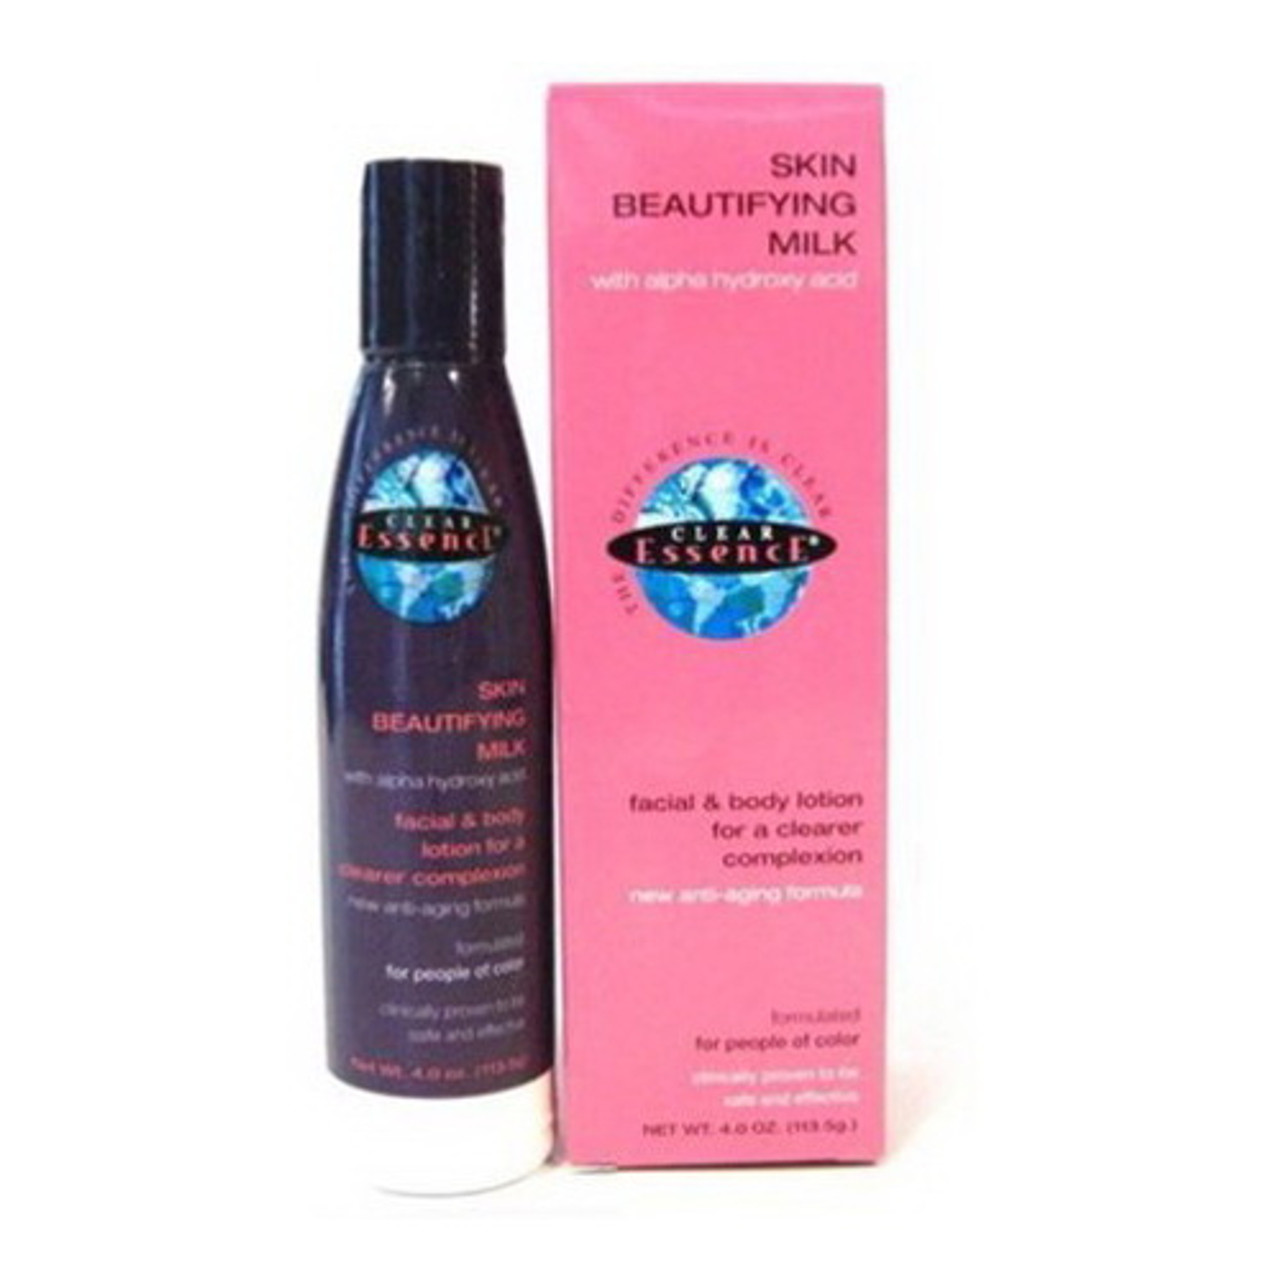 Clear Essence Skin Beautifying Milk Facial and Body Lotion With Alpha Hydroxy Acid, - myotcstore.com